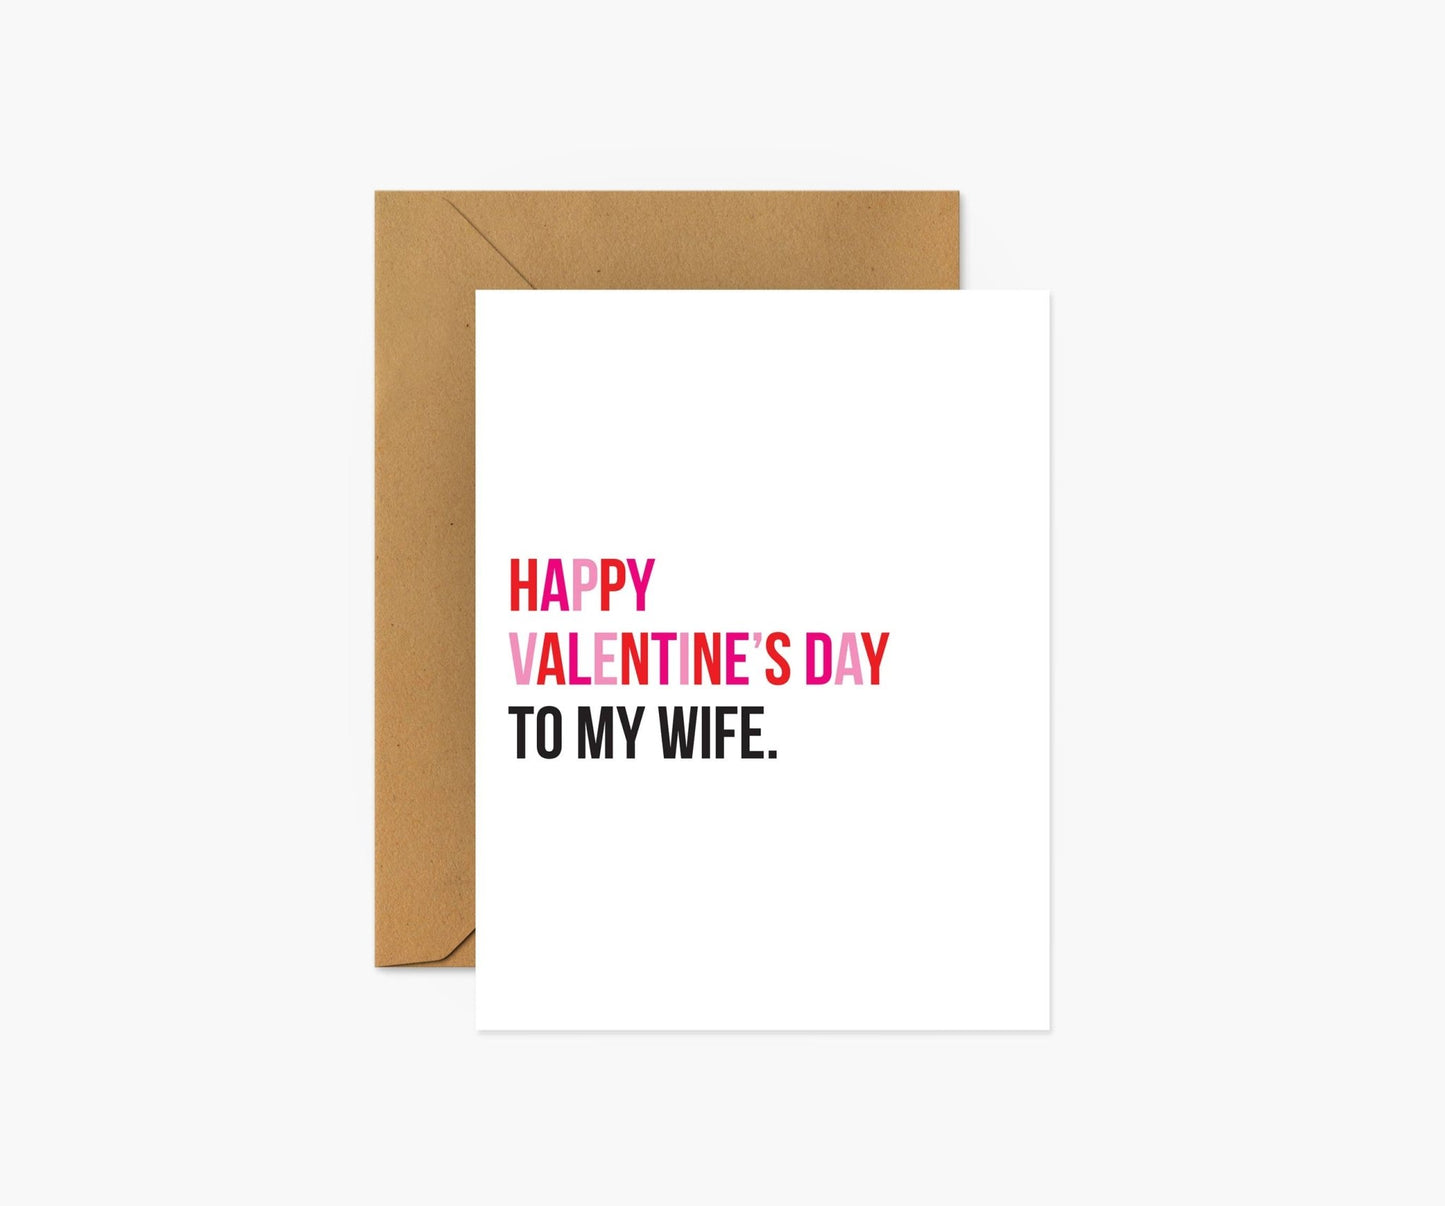 To My Wife - Valentine's Day Card - PaperGeenius